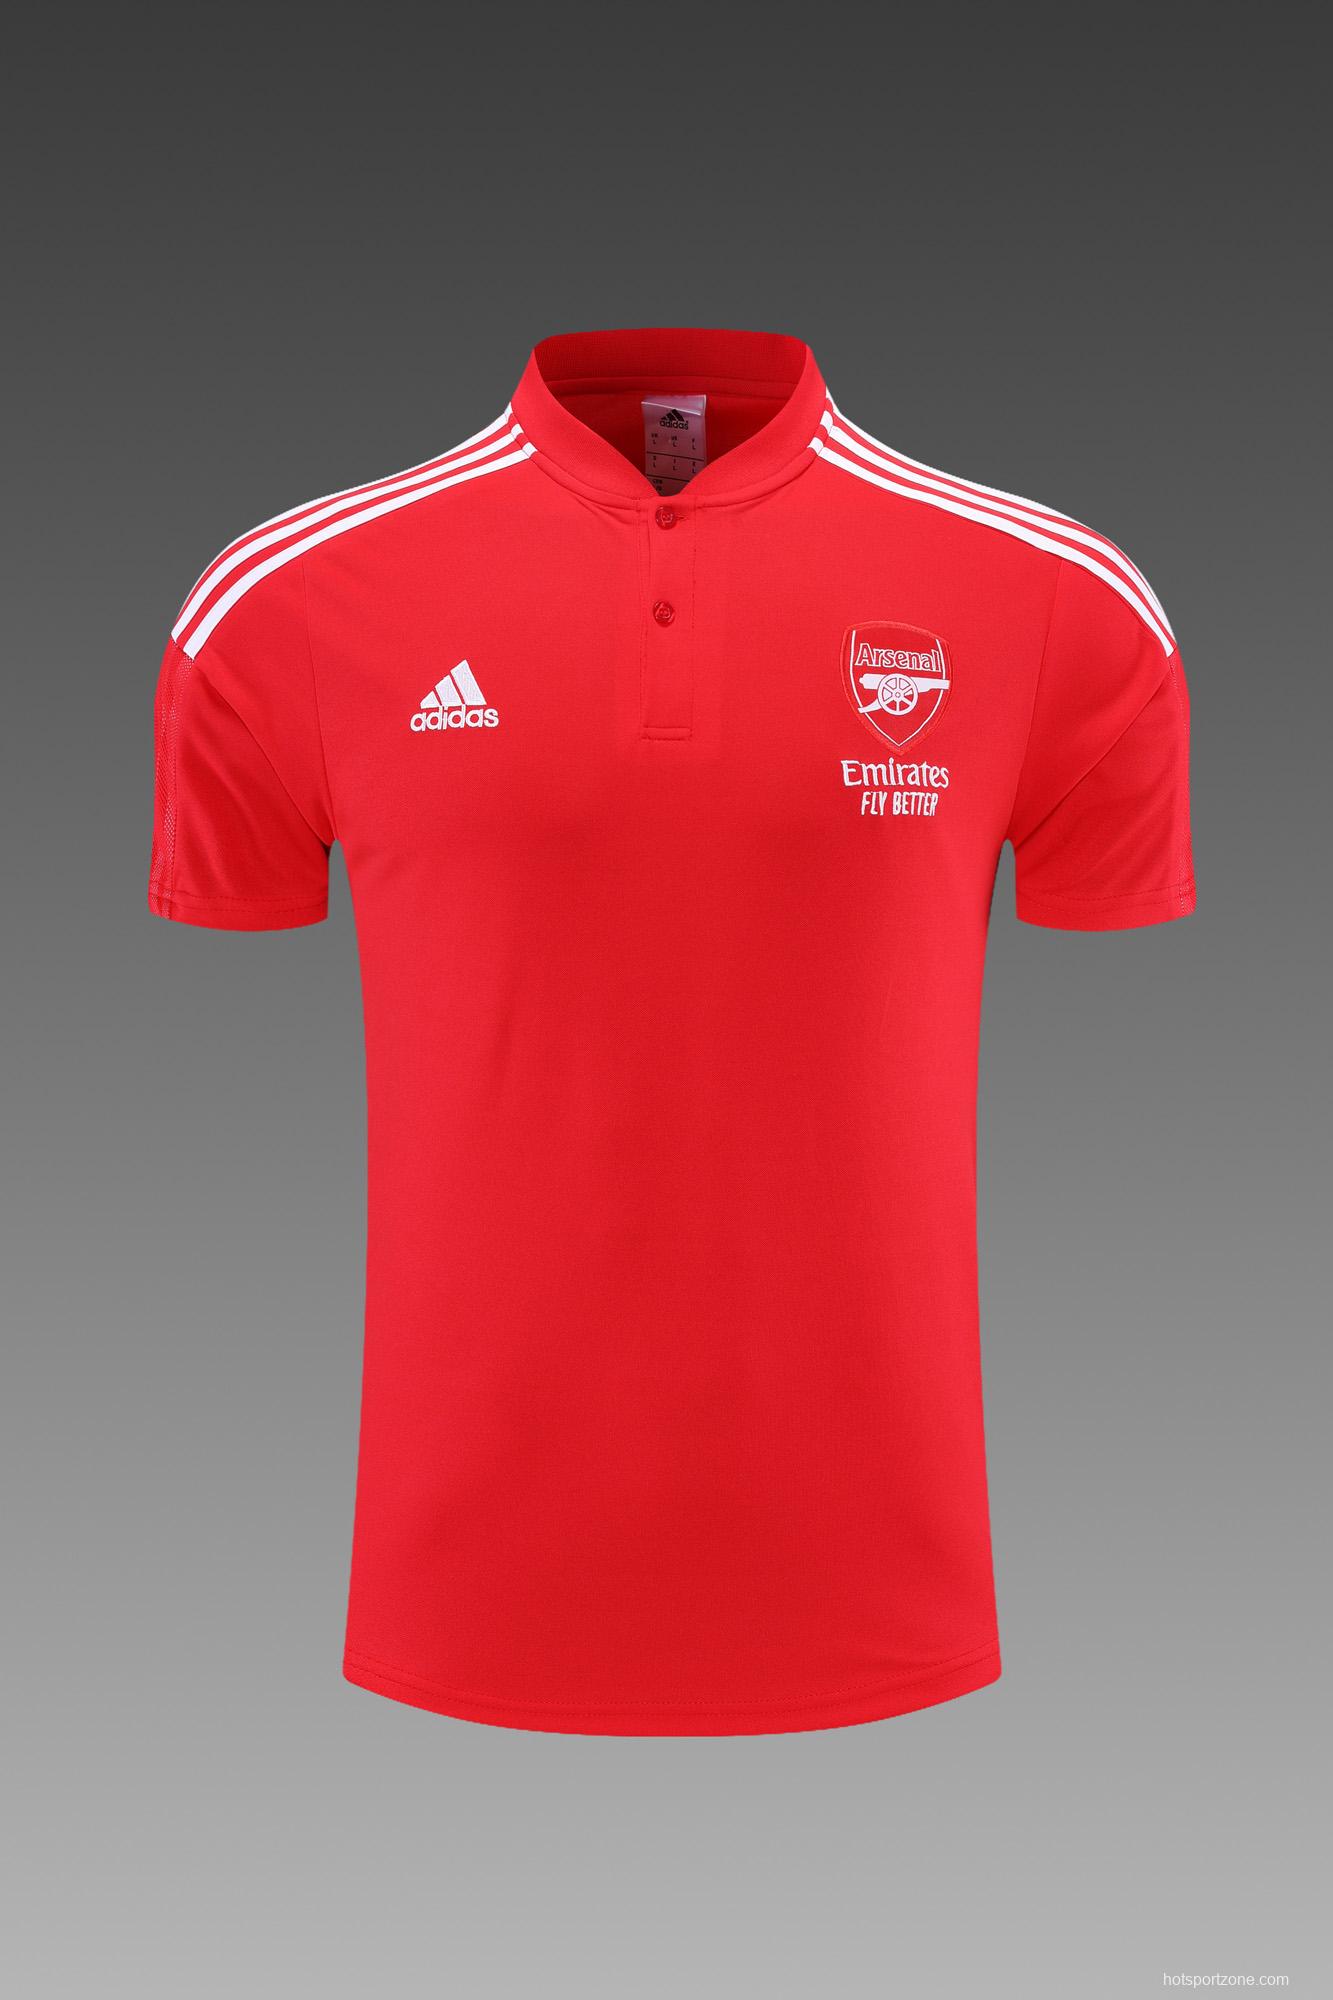 Arsenal POLO kit red black (not supported to be sold separately)